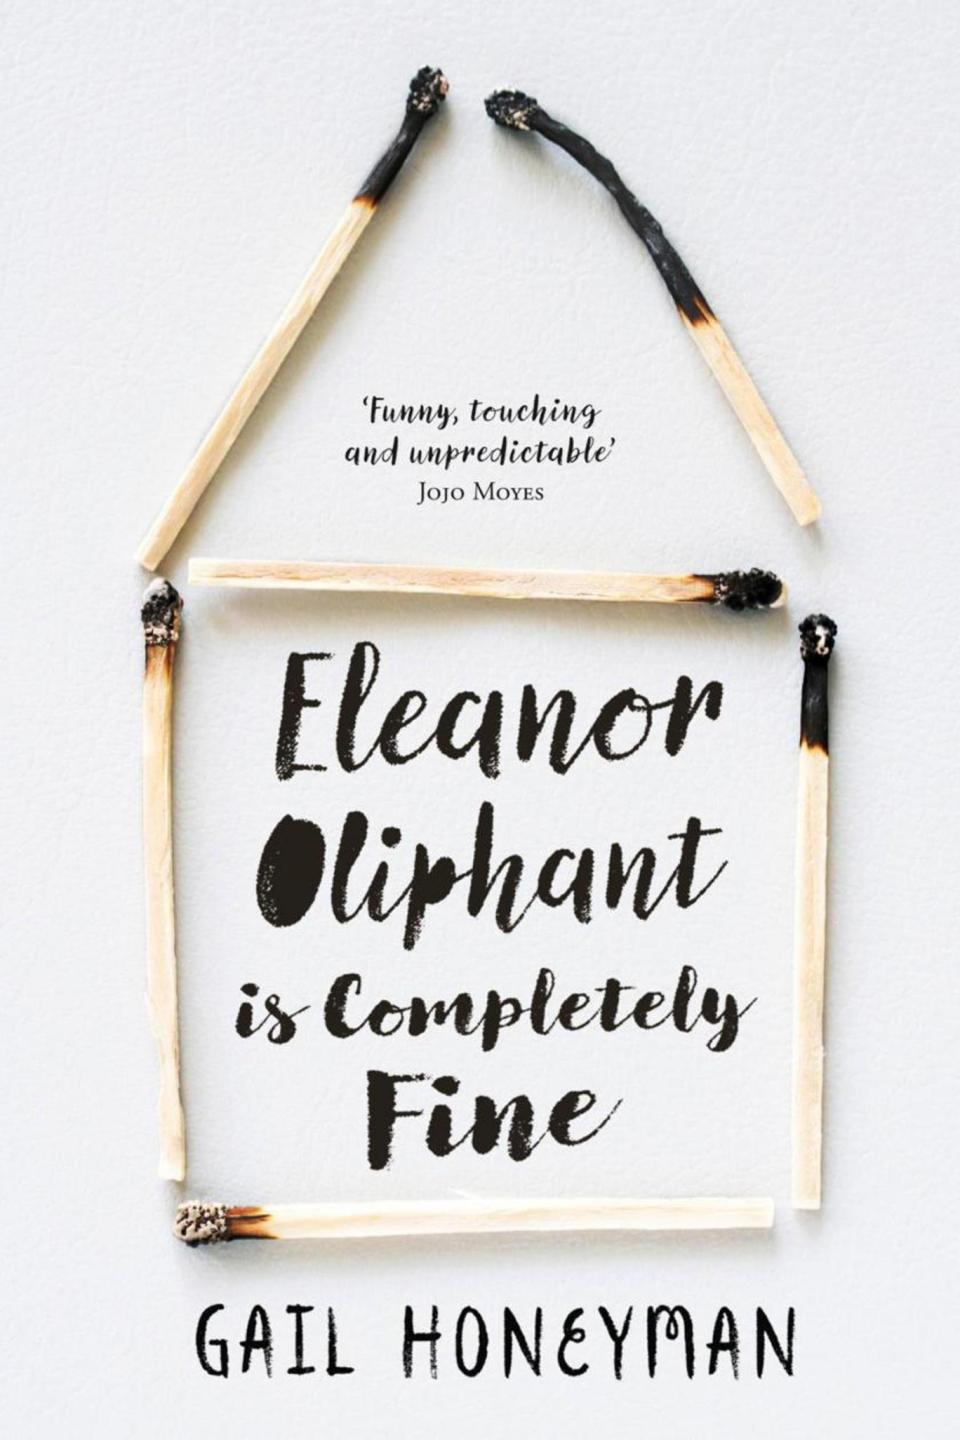 The cover of Eleanor Oliphant is Completely Fine